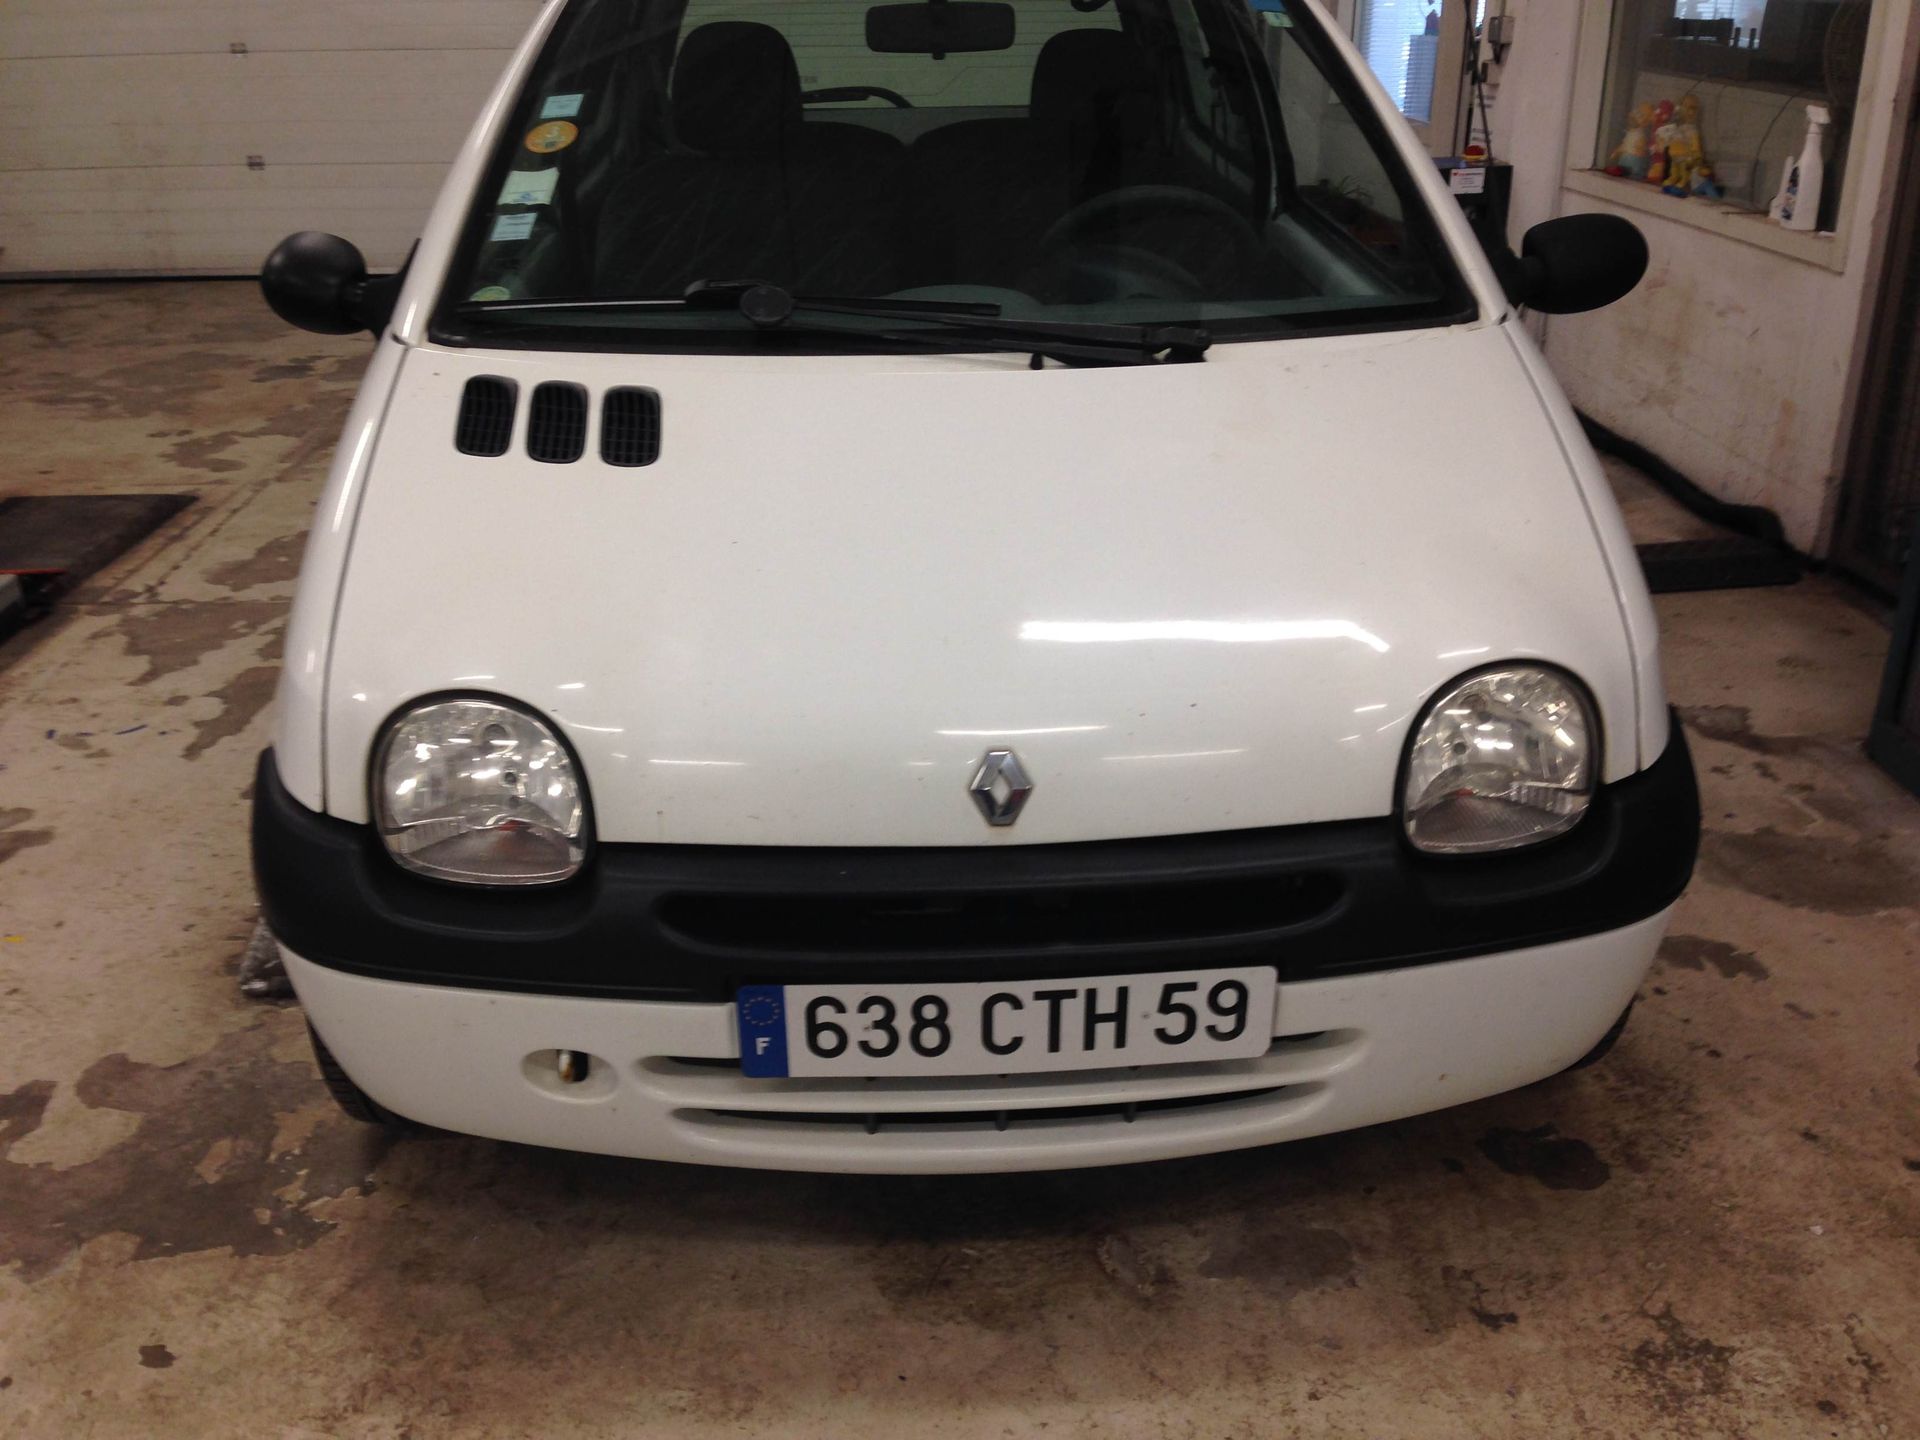 Null [RP] [RESERVE PRO] RENAULT TWINGO I 1.2i 60 CV, Essence, imm. 638 CTH 59, t&hellip;